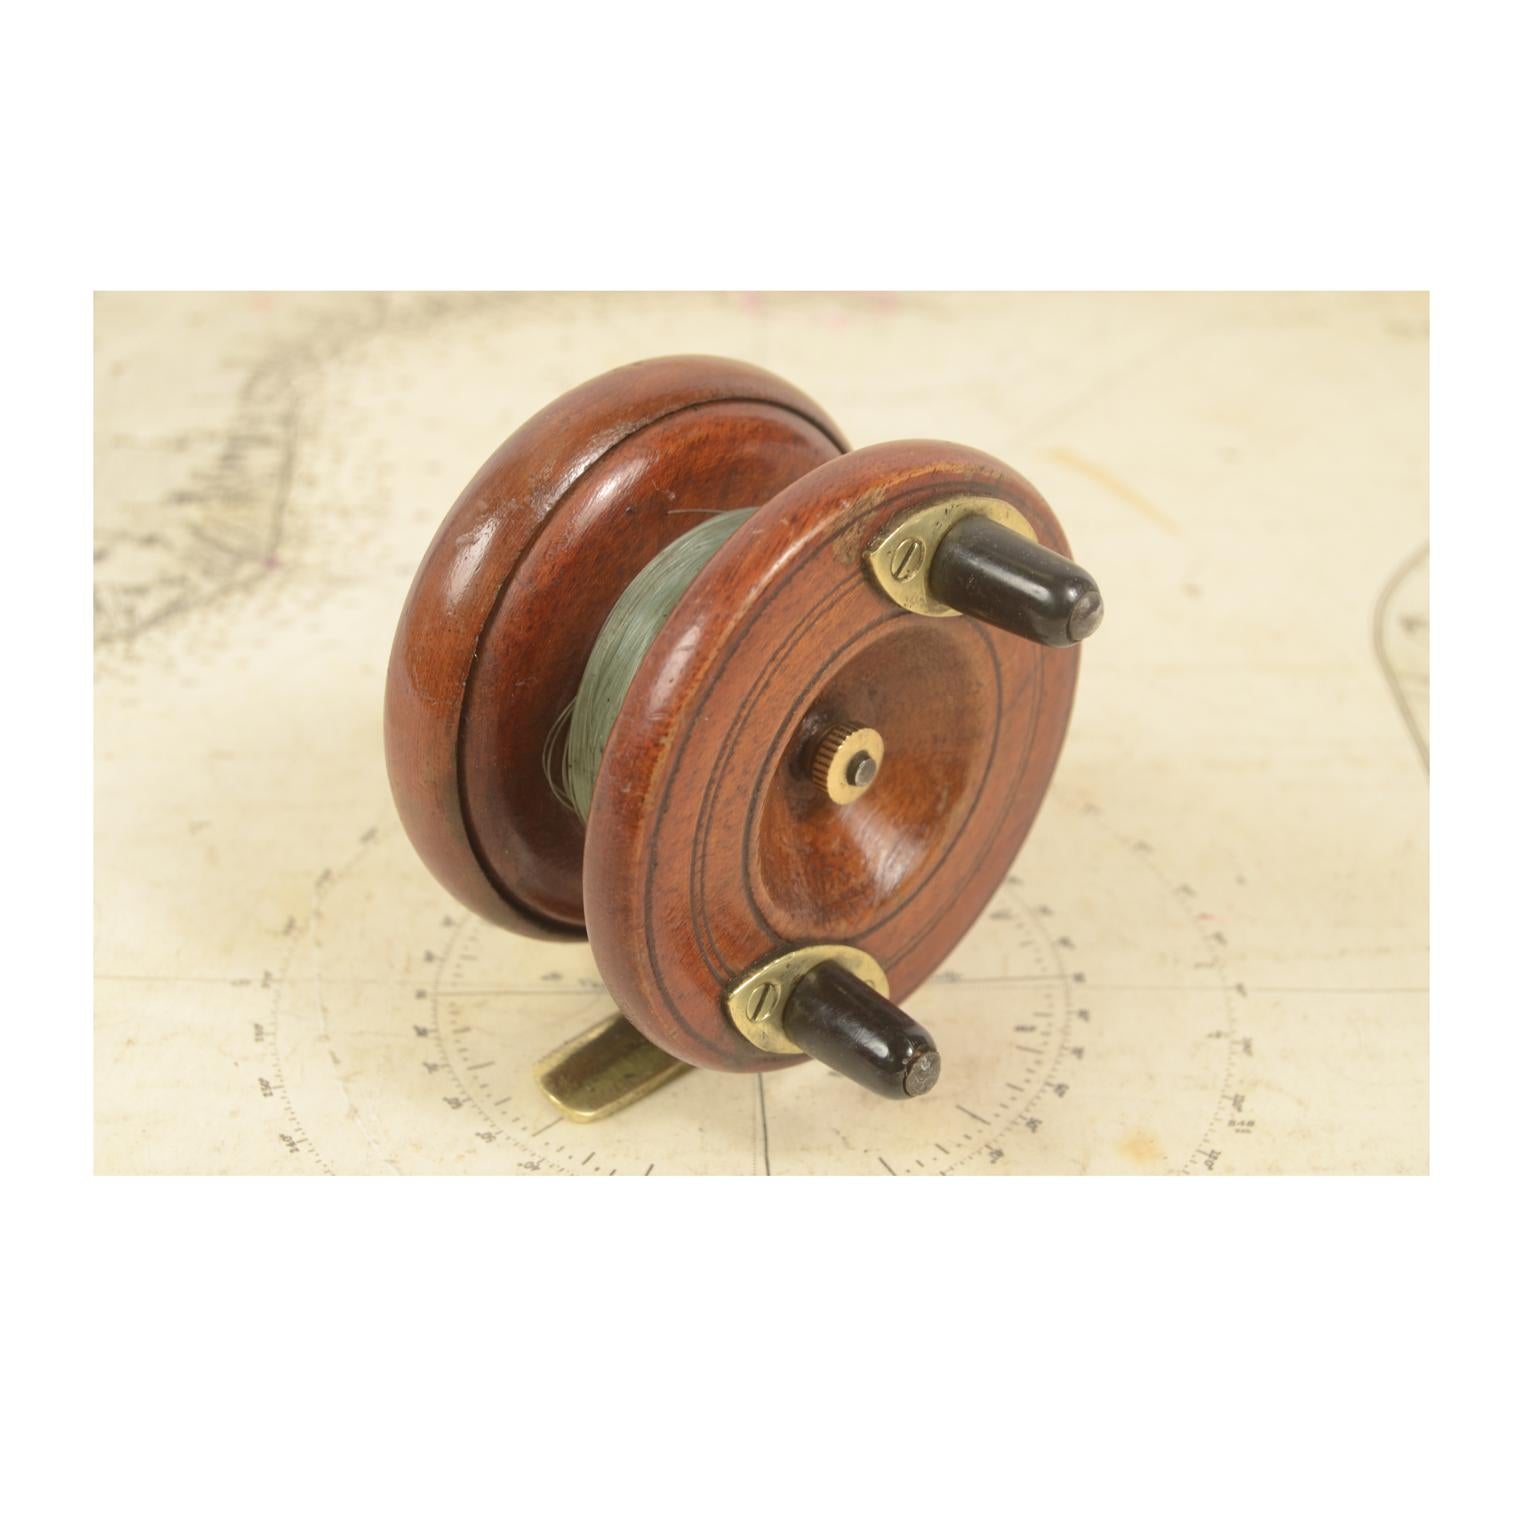 Fishing reel made of oak, brass and horn, English manufacture from the early 1900s. Excellent condition, fully functional. Measures: Diameter 7.7 x 4.8 cm.
Shipping is insured by Lloyd's London; our gift box is free (look at the last picture).
 